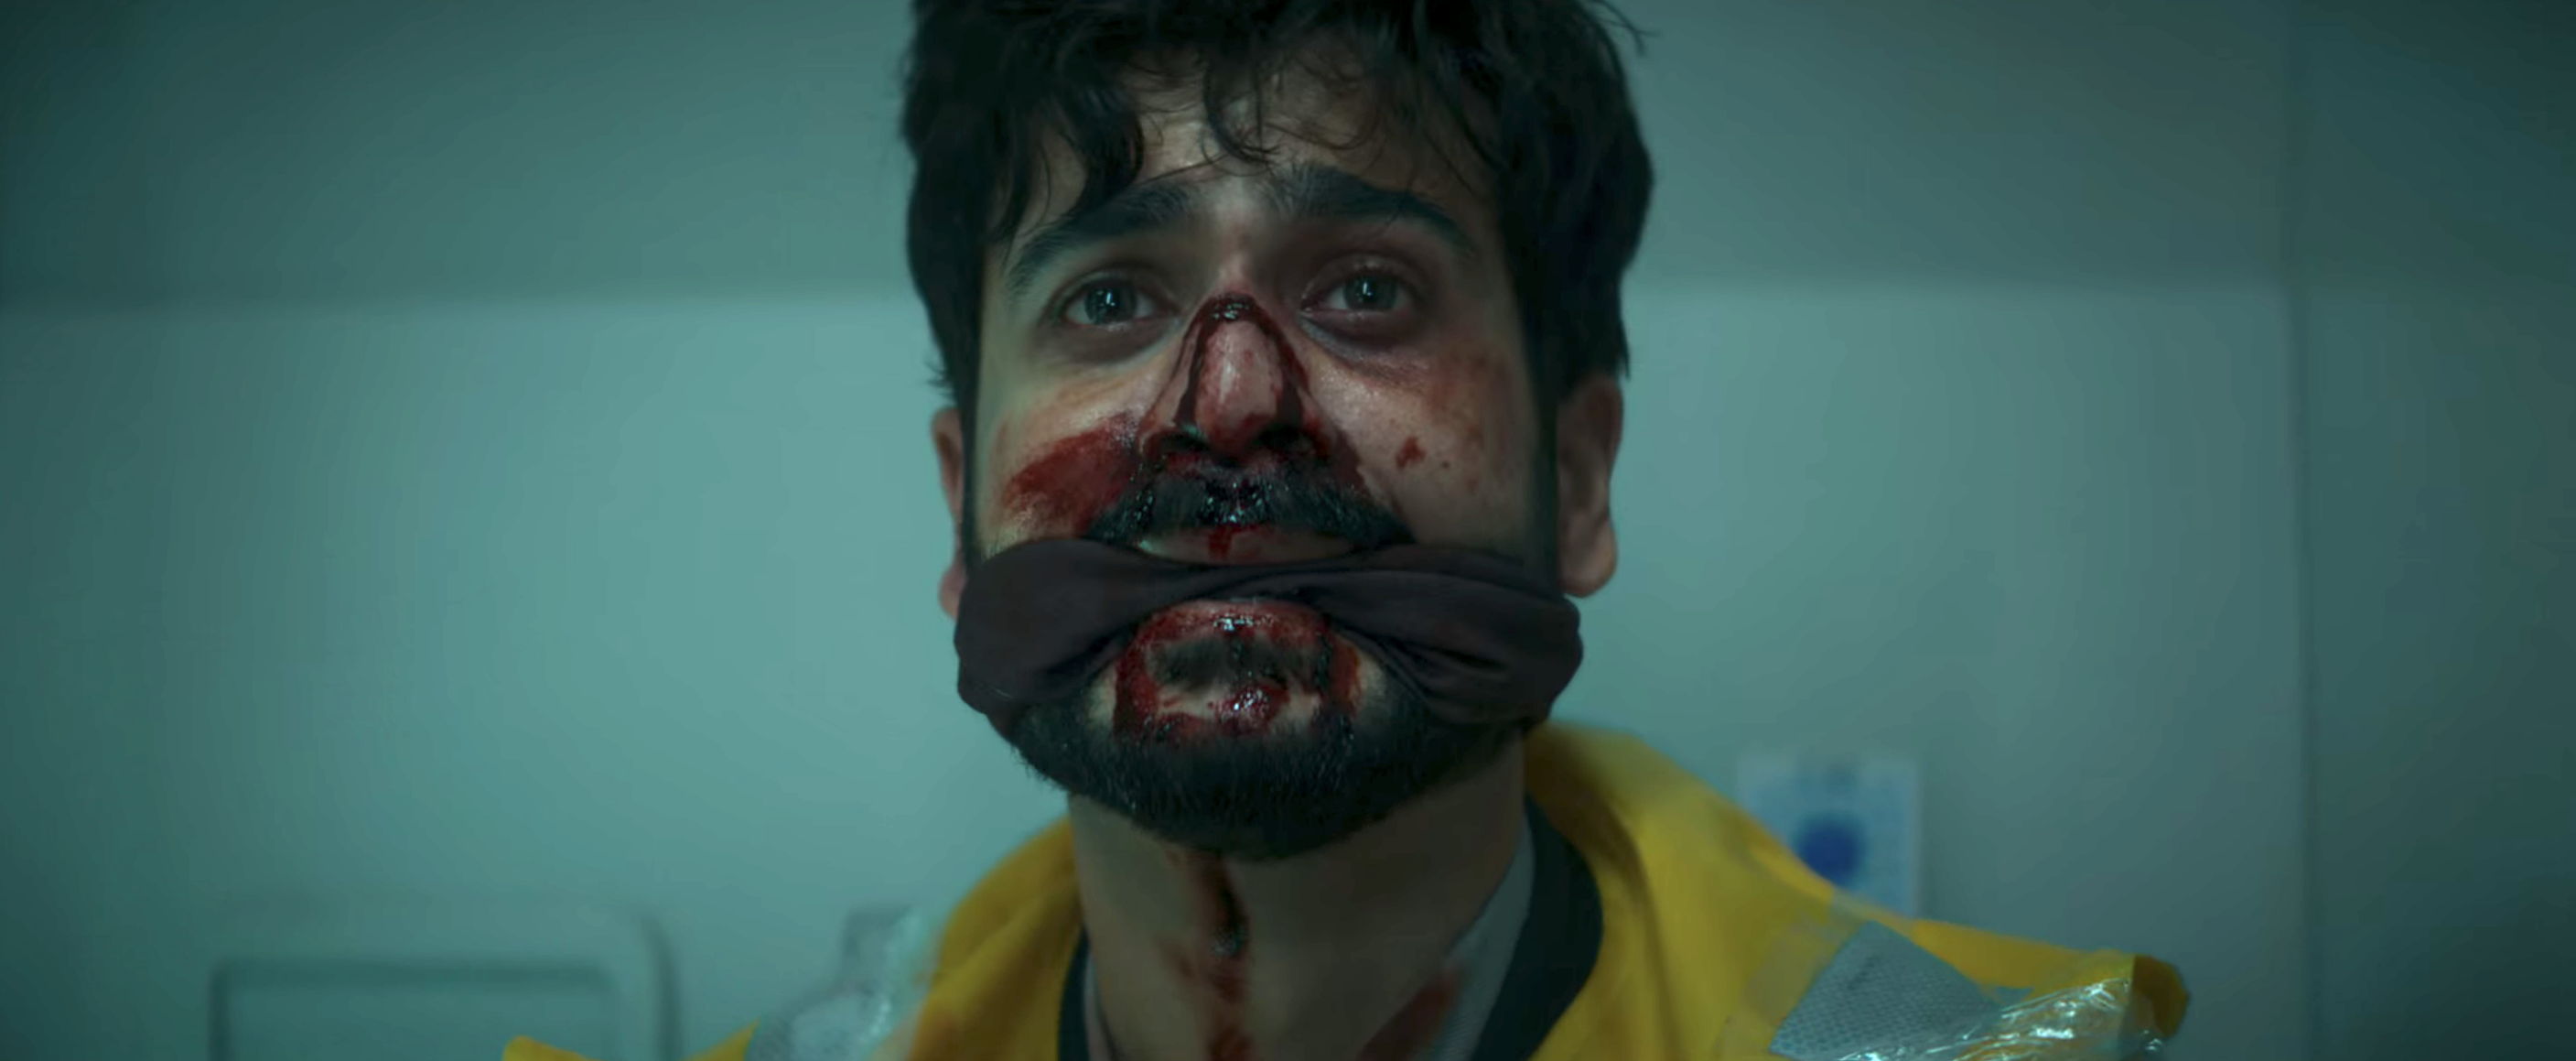 Ankit (Sunny Kaushal) sits in an airplane bathroom in Chor Nikal Ke Bhaga, gagged and covered with blood from a broken nose